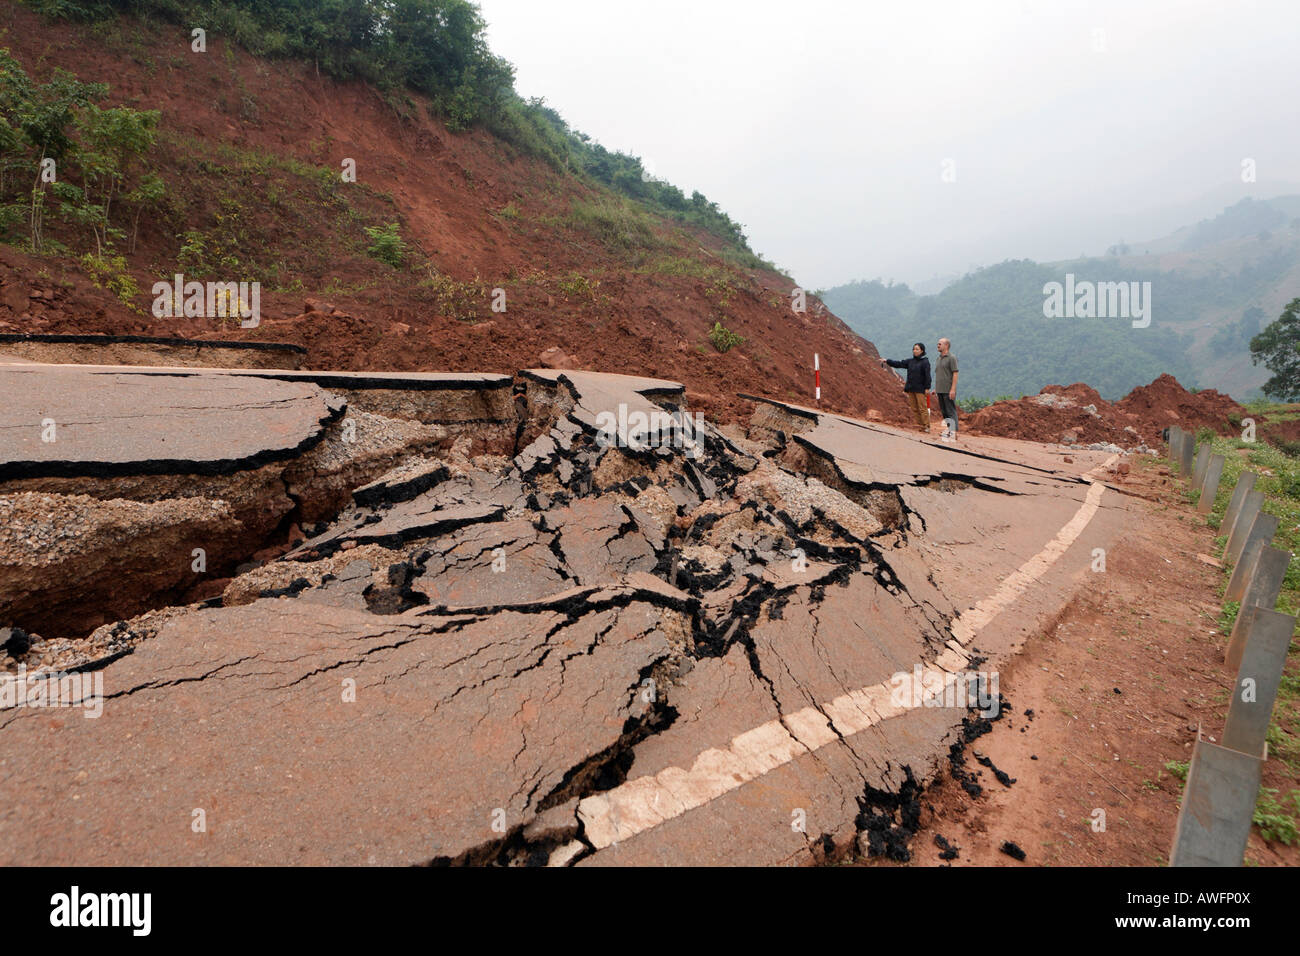 Damages after landslide on the street between Mok Chau and Yen Chau, Son La Province, Vietnam, Asia Stock Photo